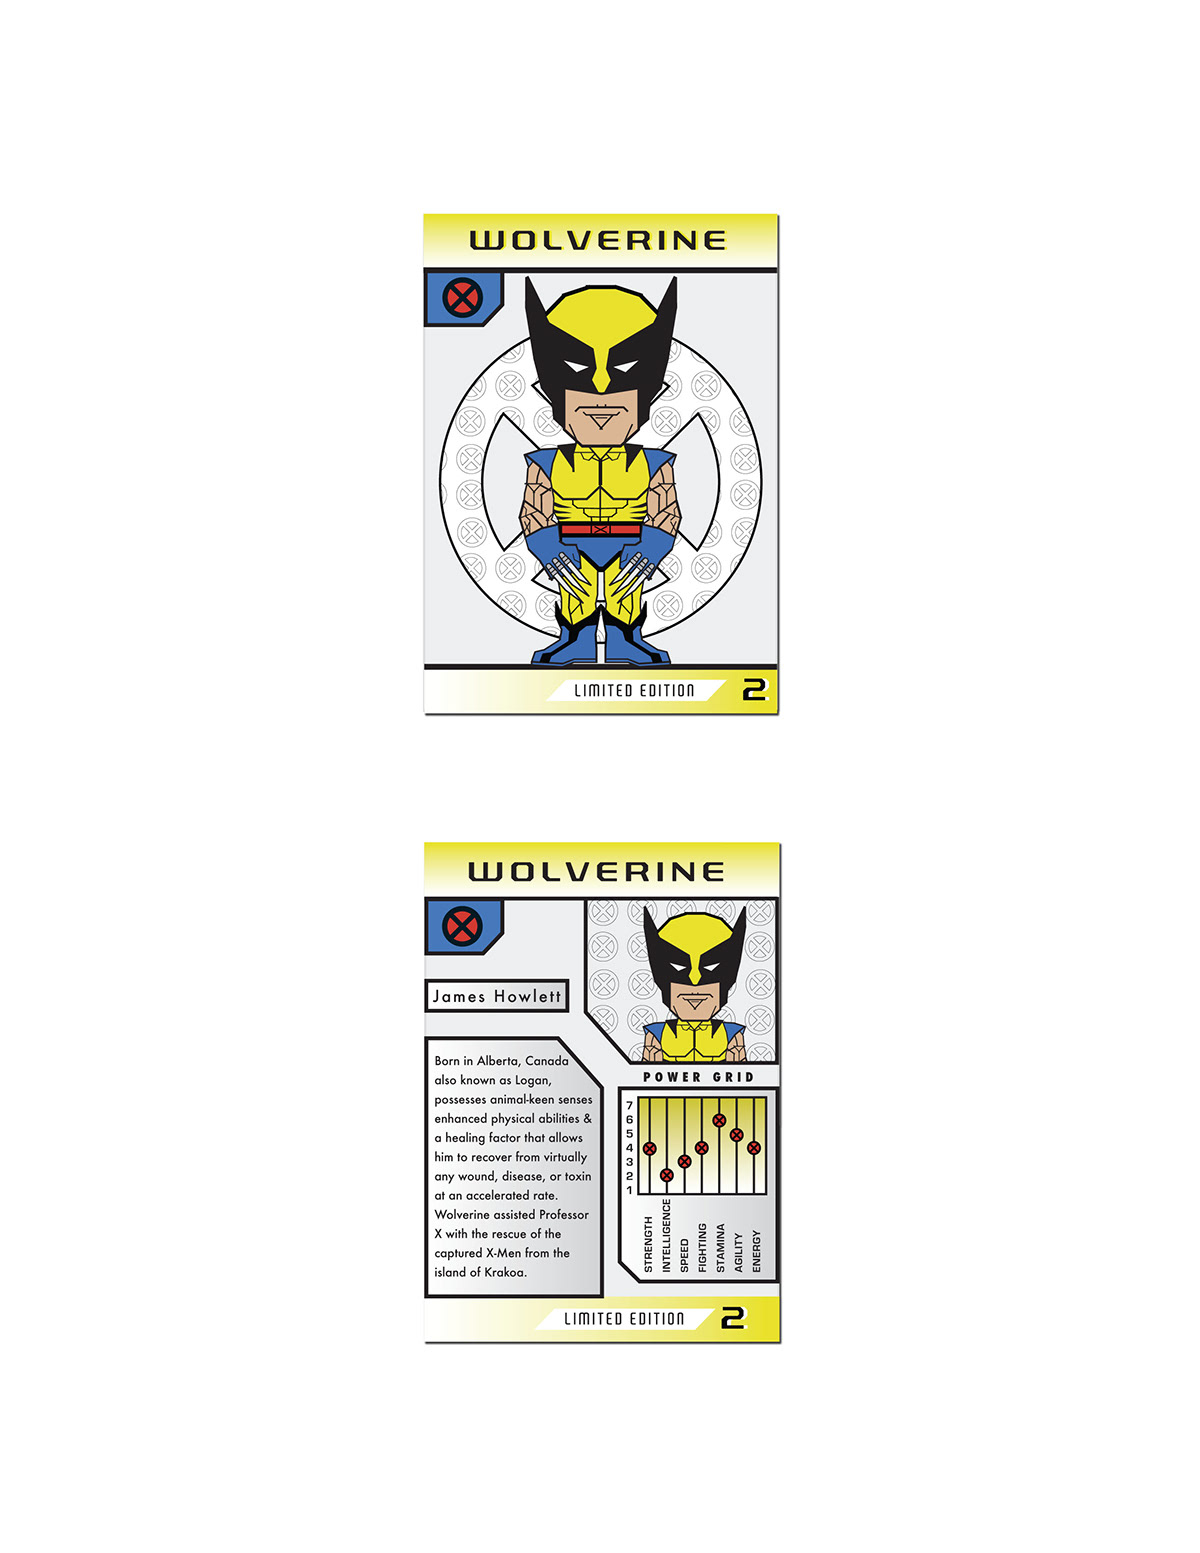 x-men characters wolverine cyclops colossus magneto trading cards